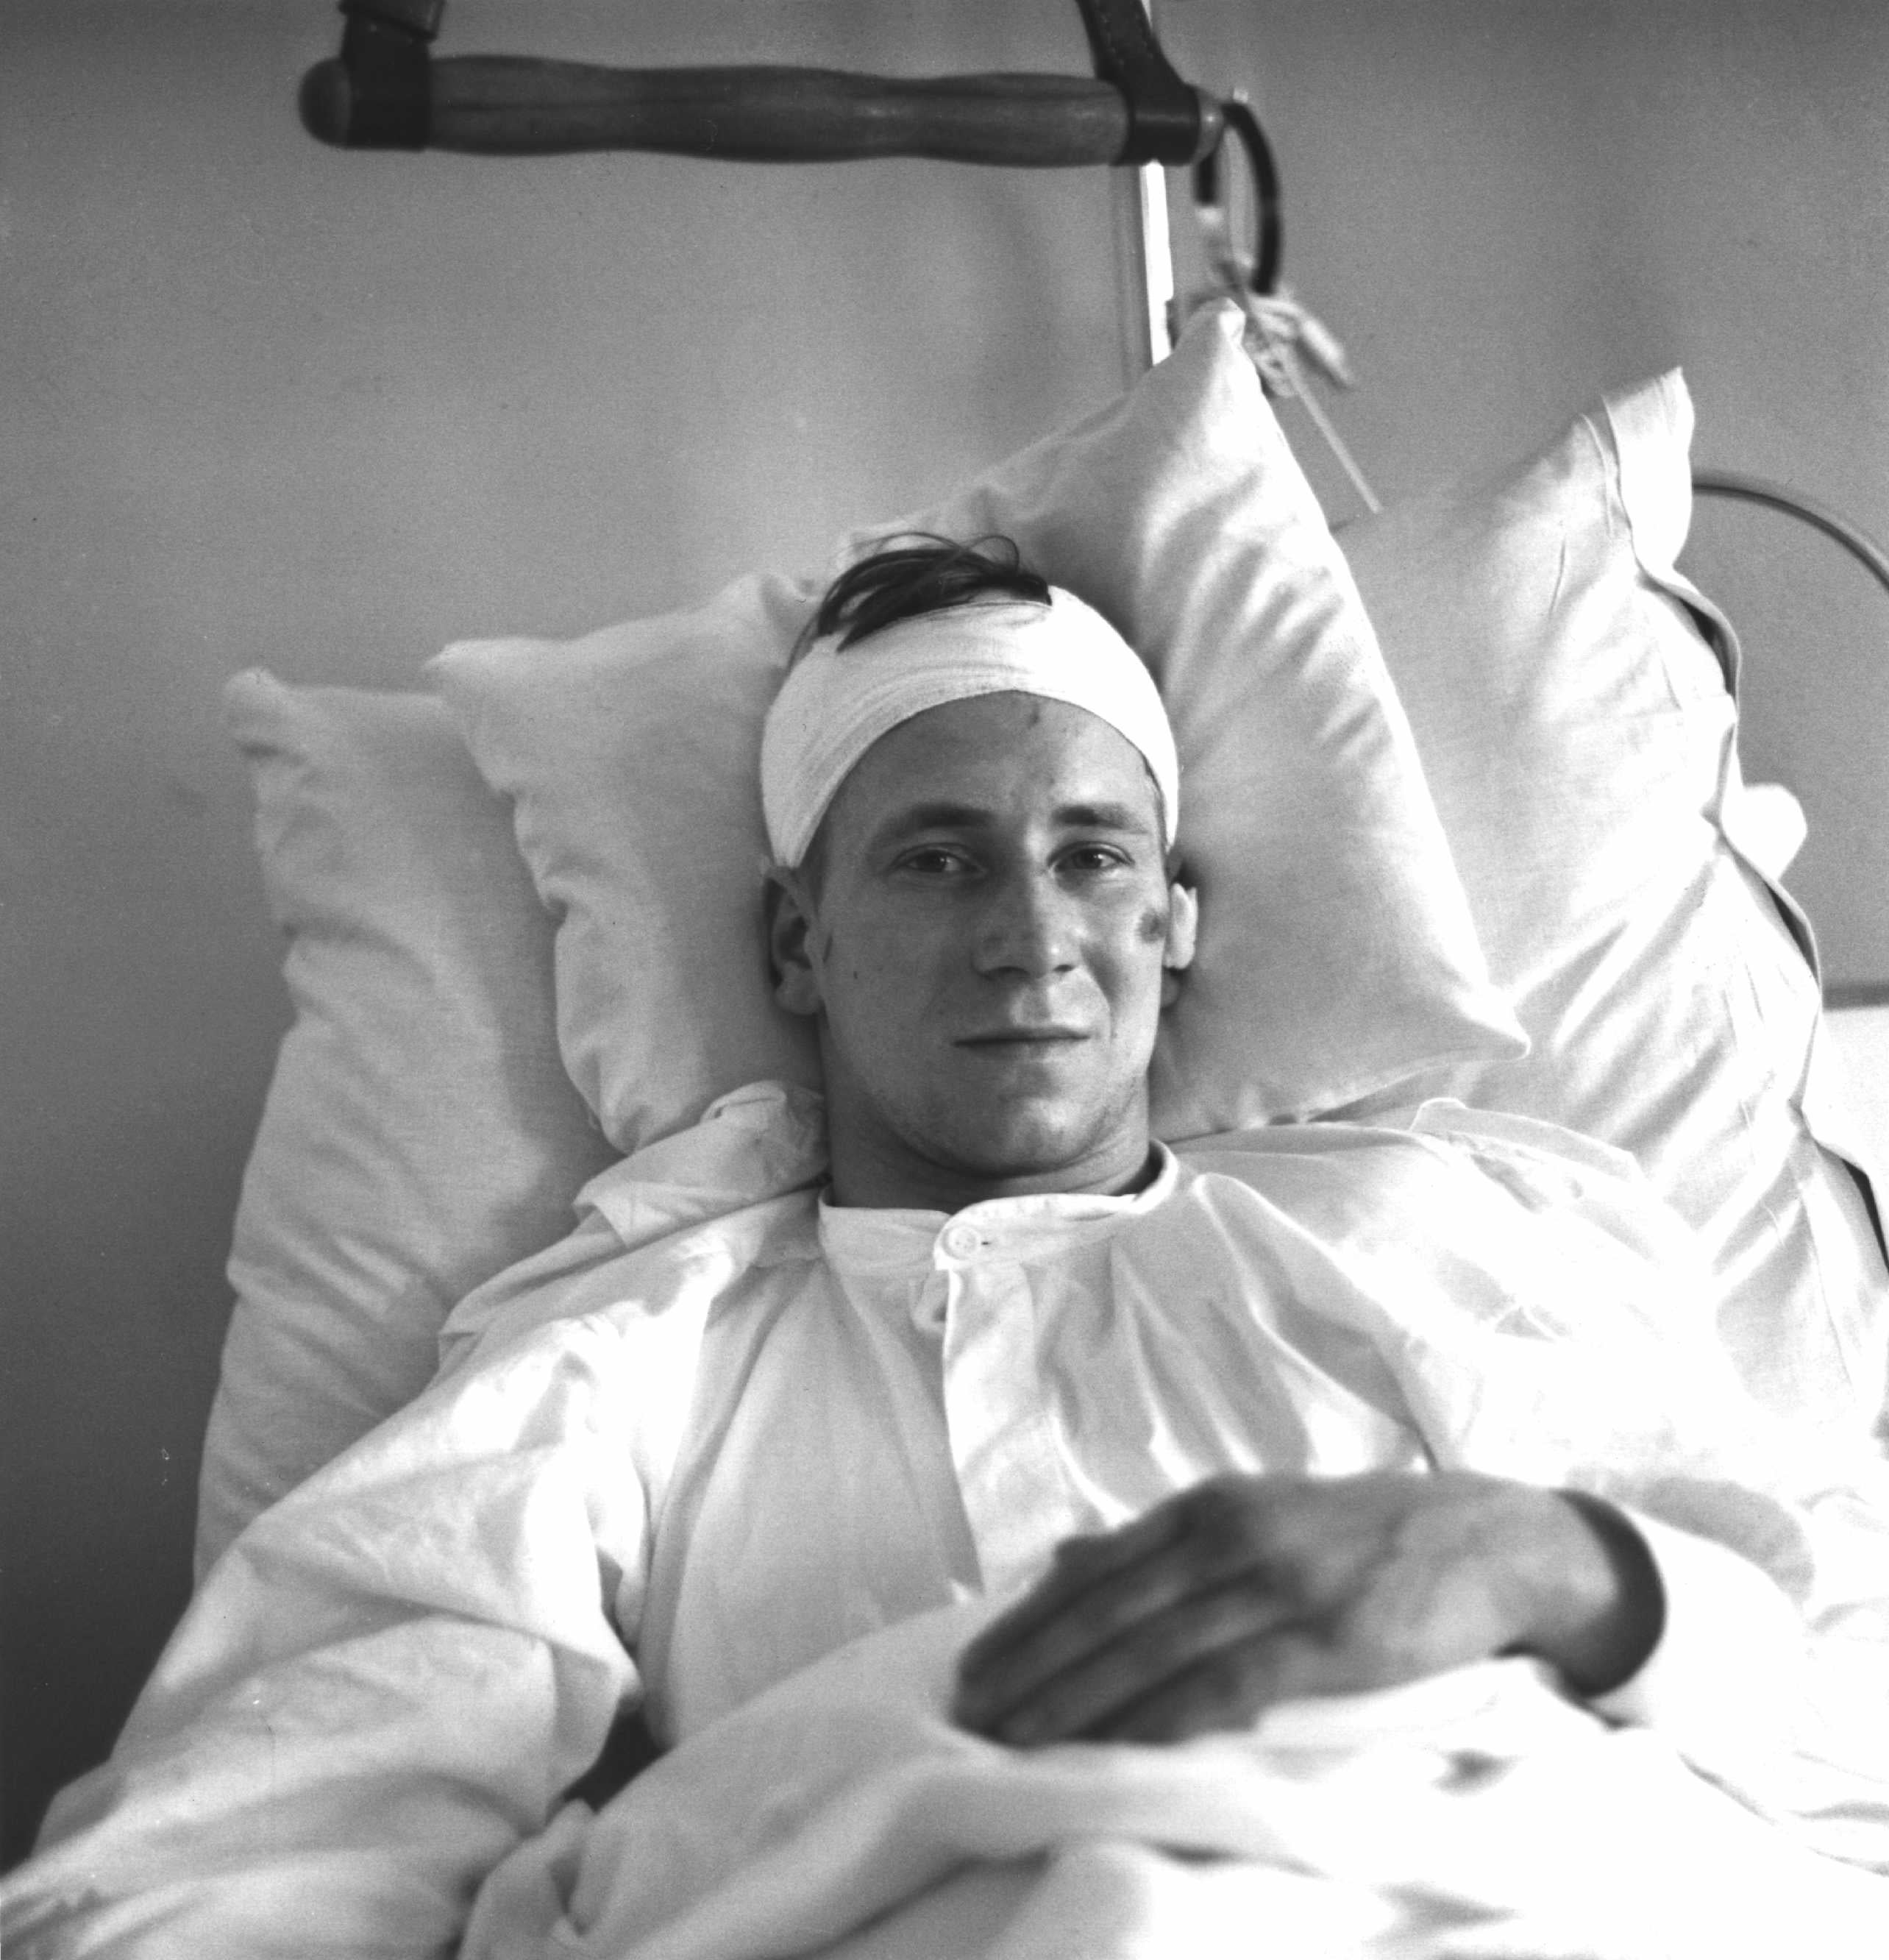 Lying in a Munich hospital, 11 days after the plane crash